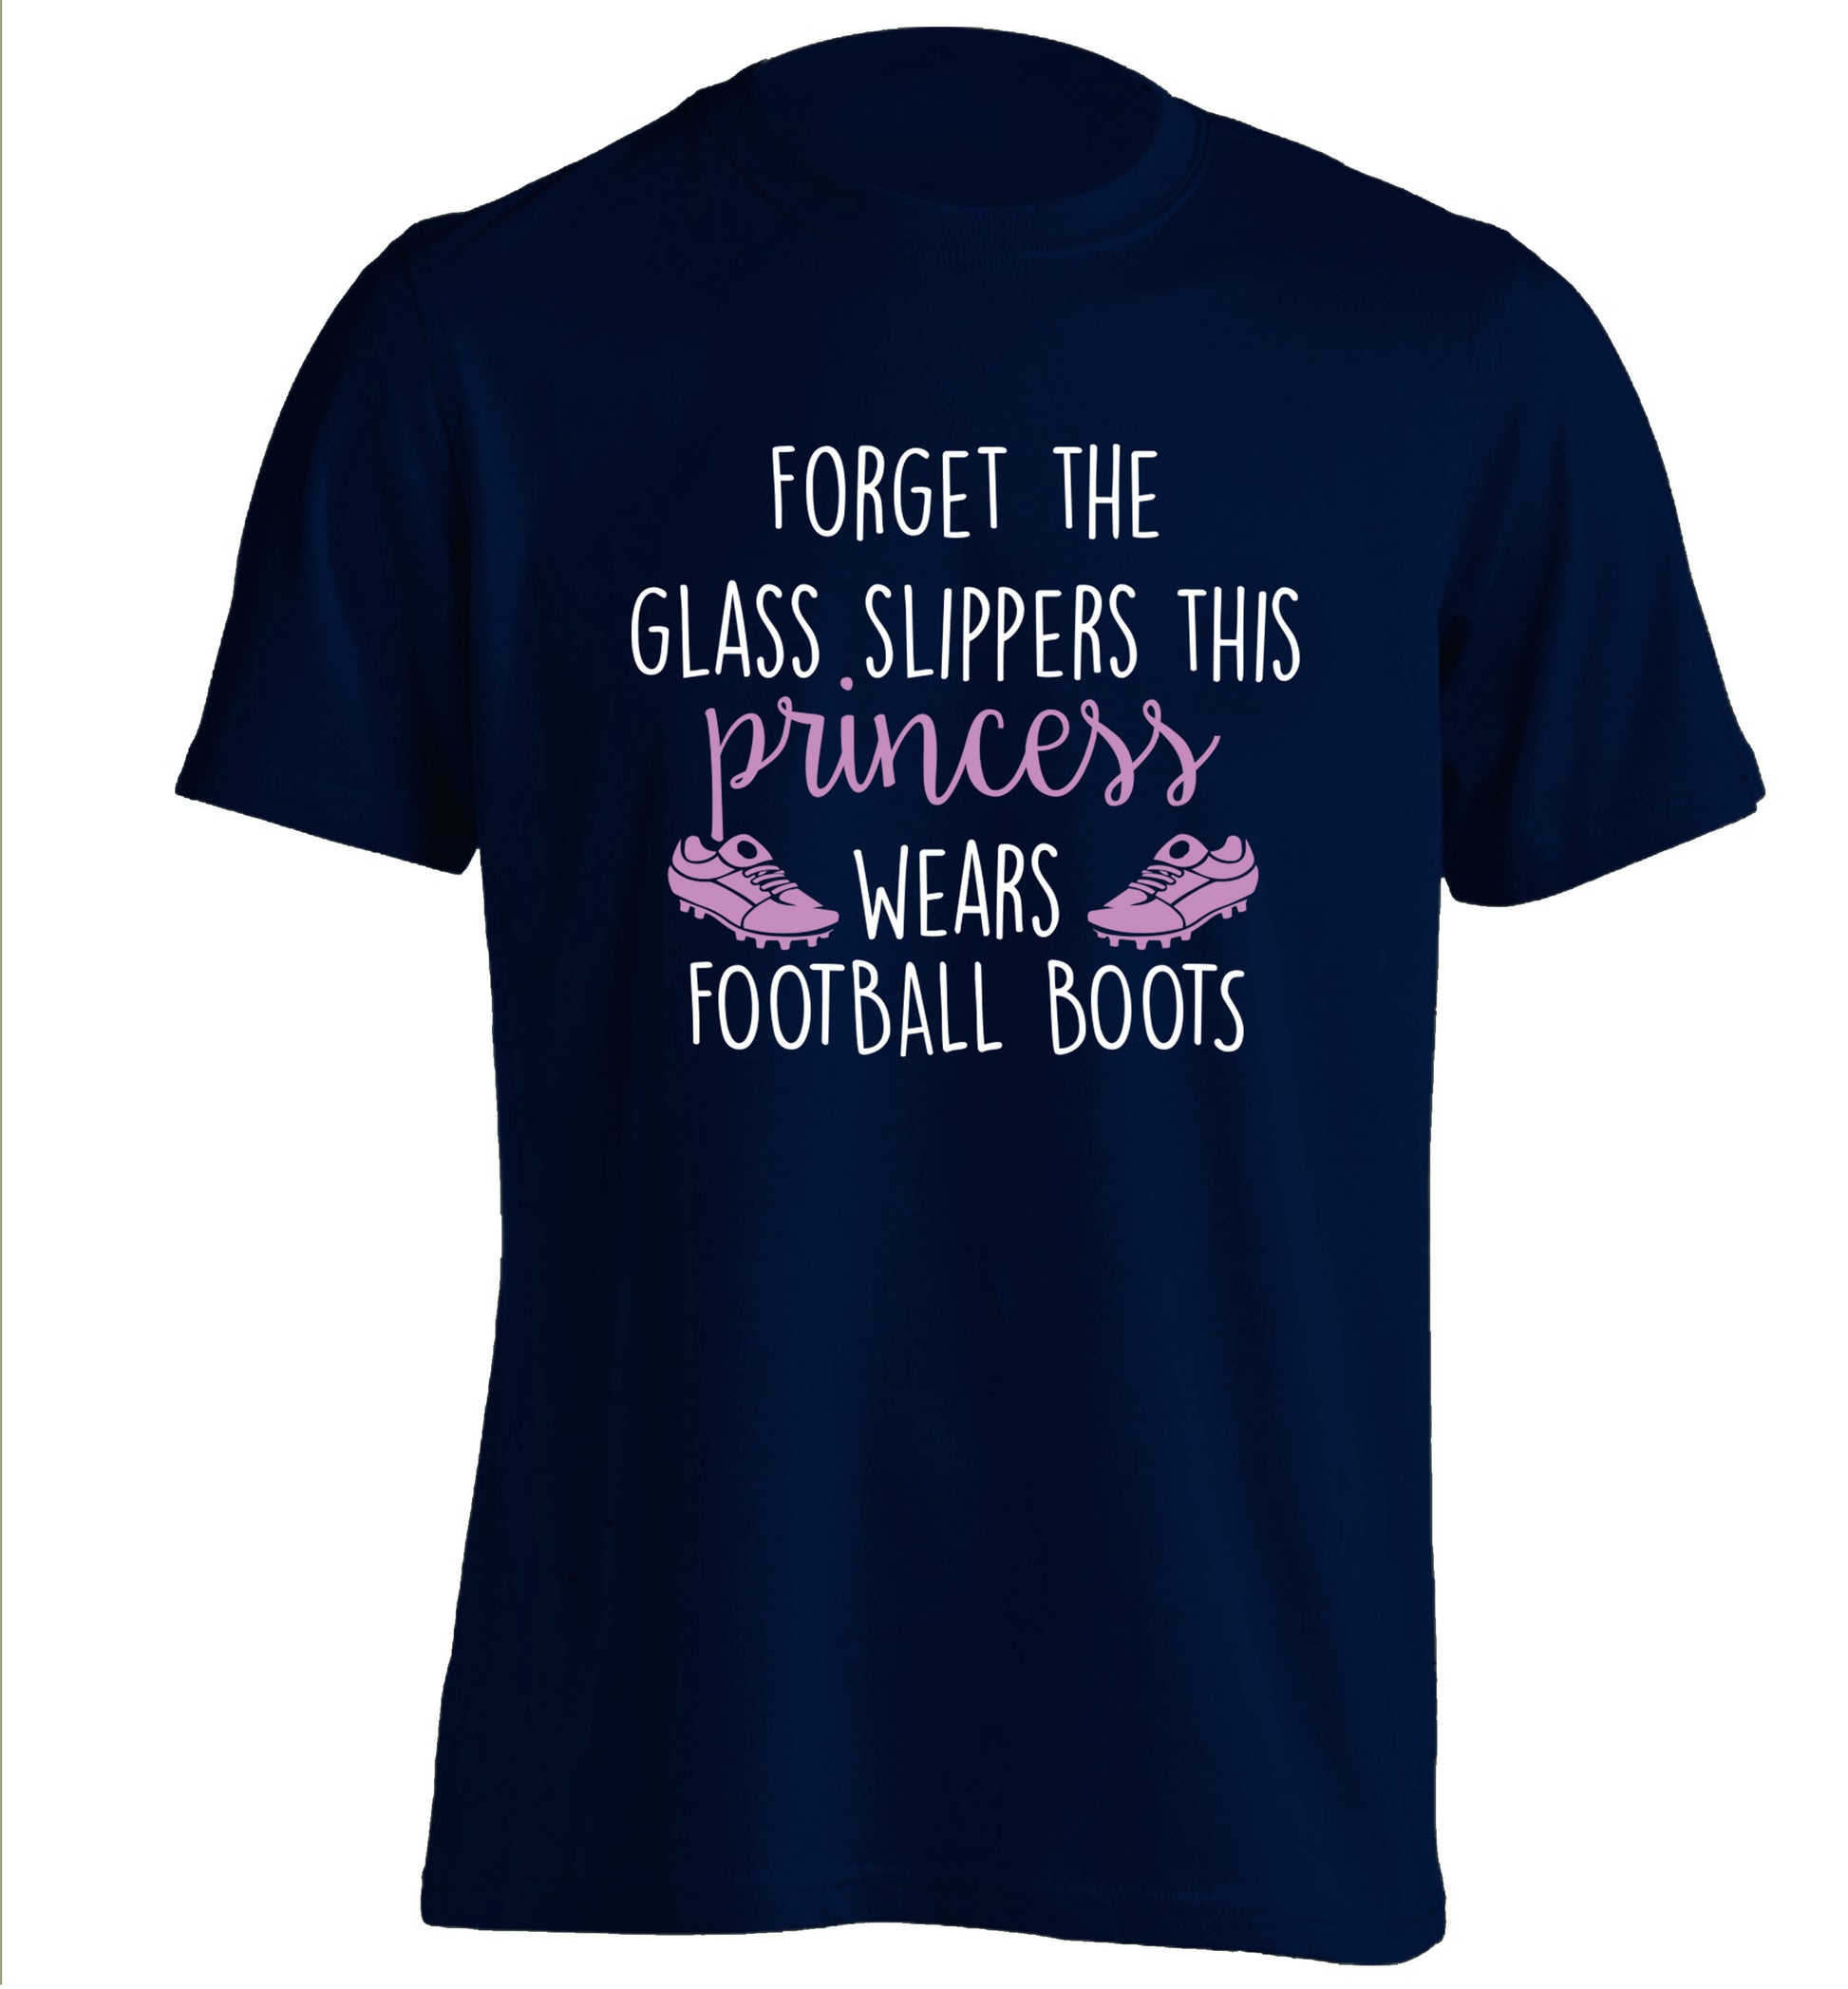 Forget the glass slippers this princess wears football boots adults unisex navy Tshirt 2XL